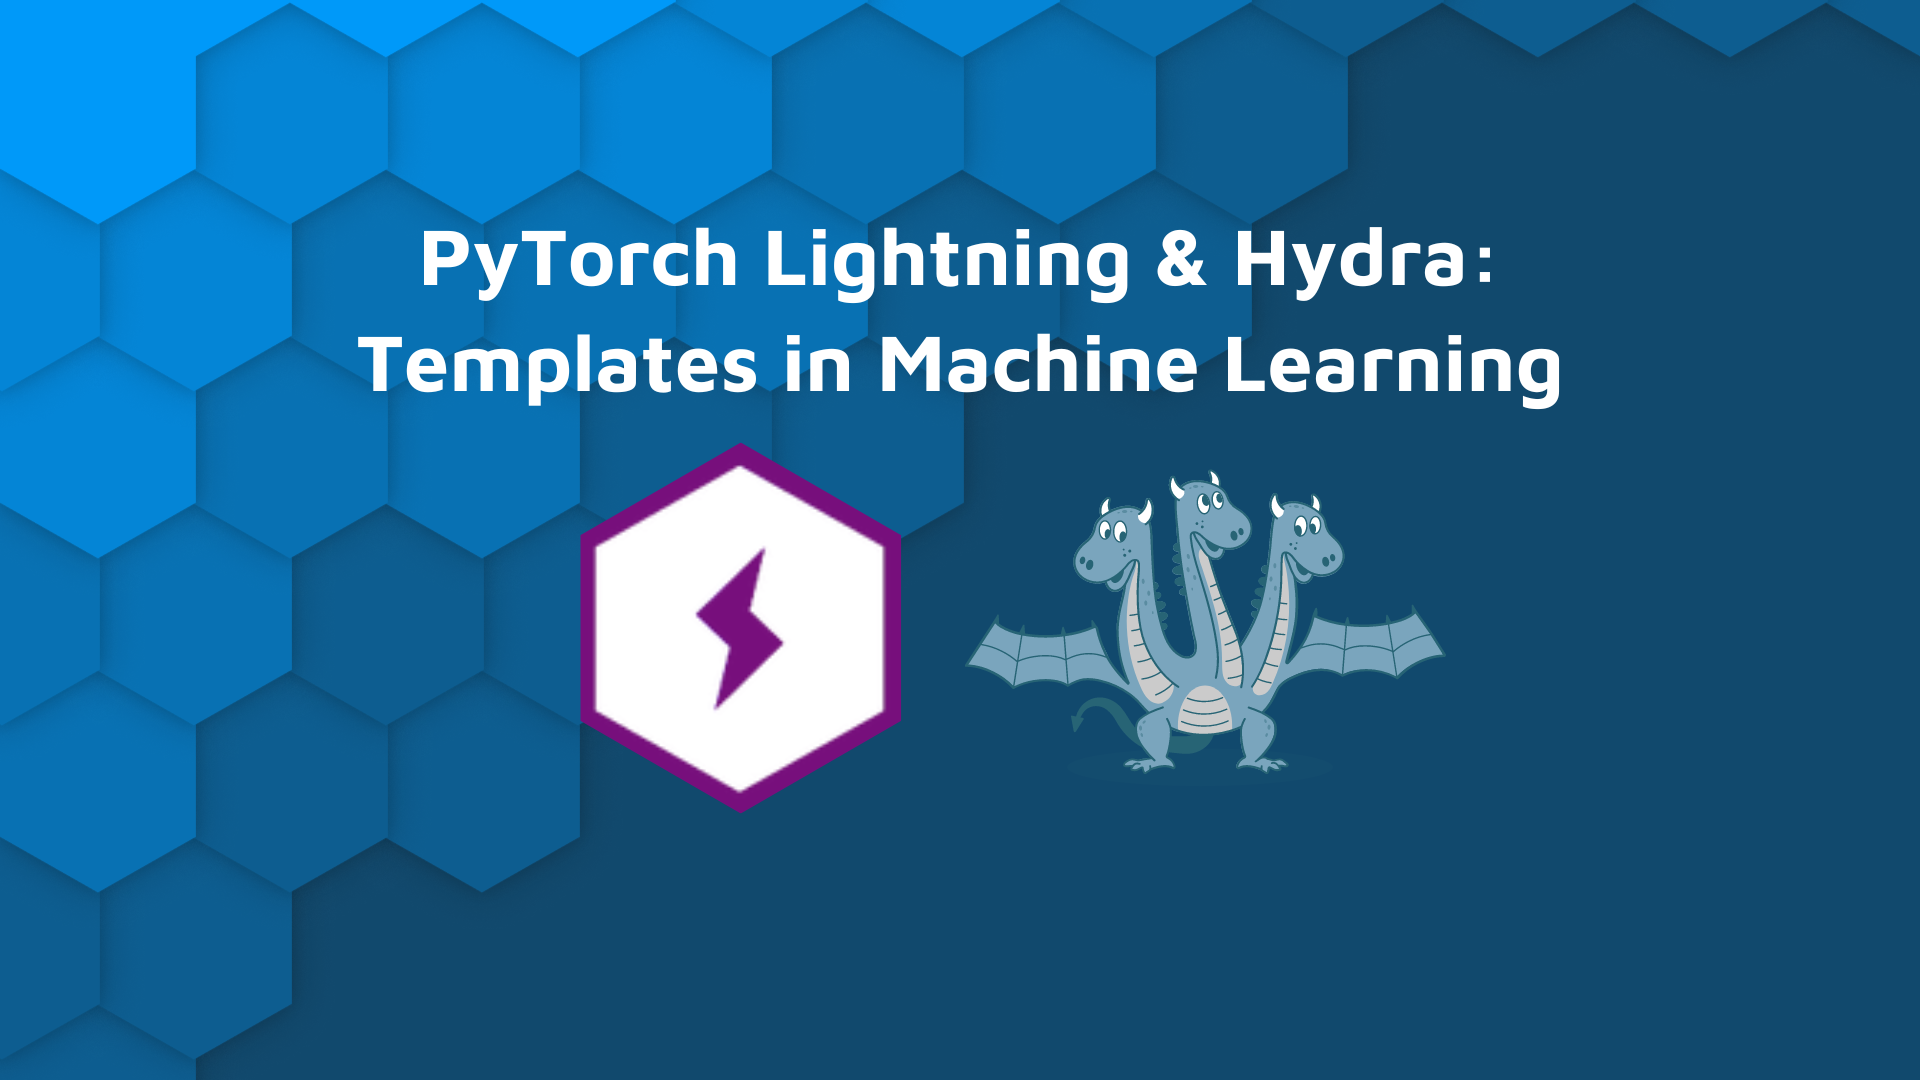 PyTorch Lightning & Hydra - Templates in Machine Learning